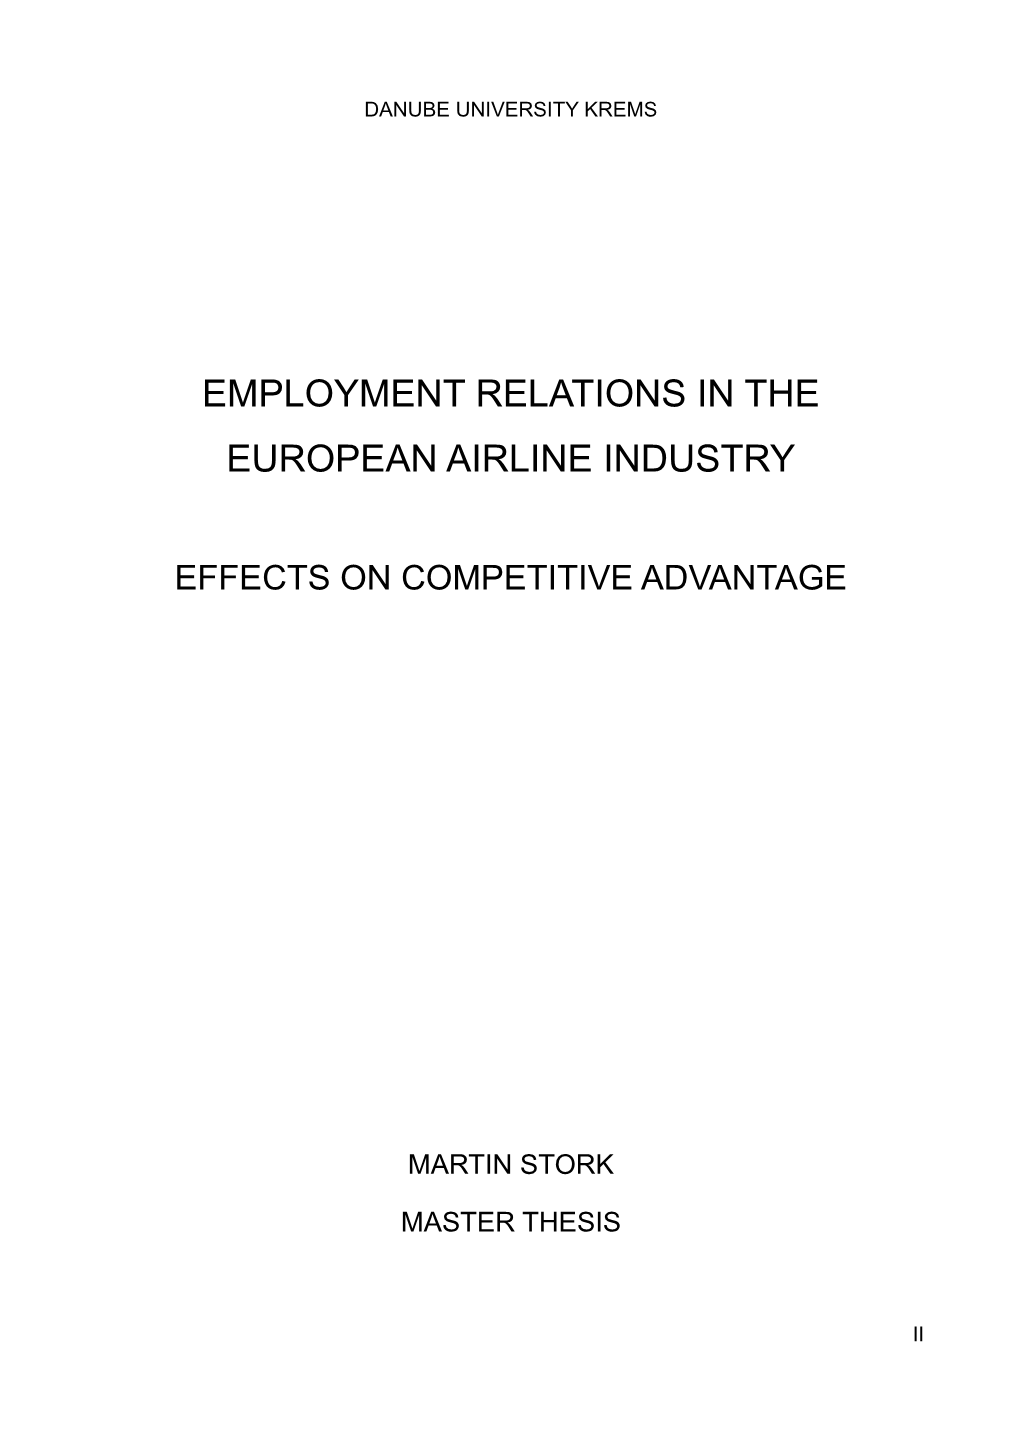 Employment Relations in the European Airline Industry